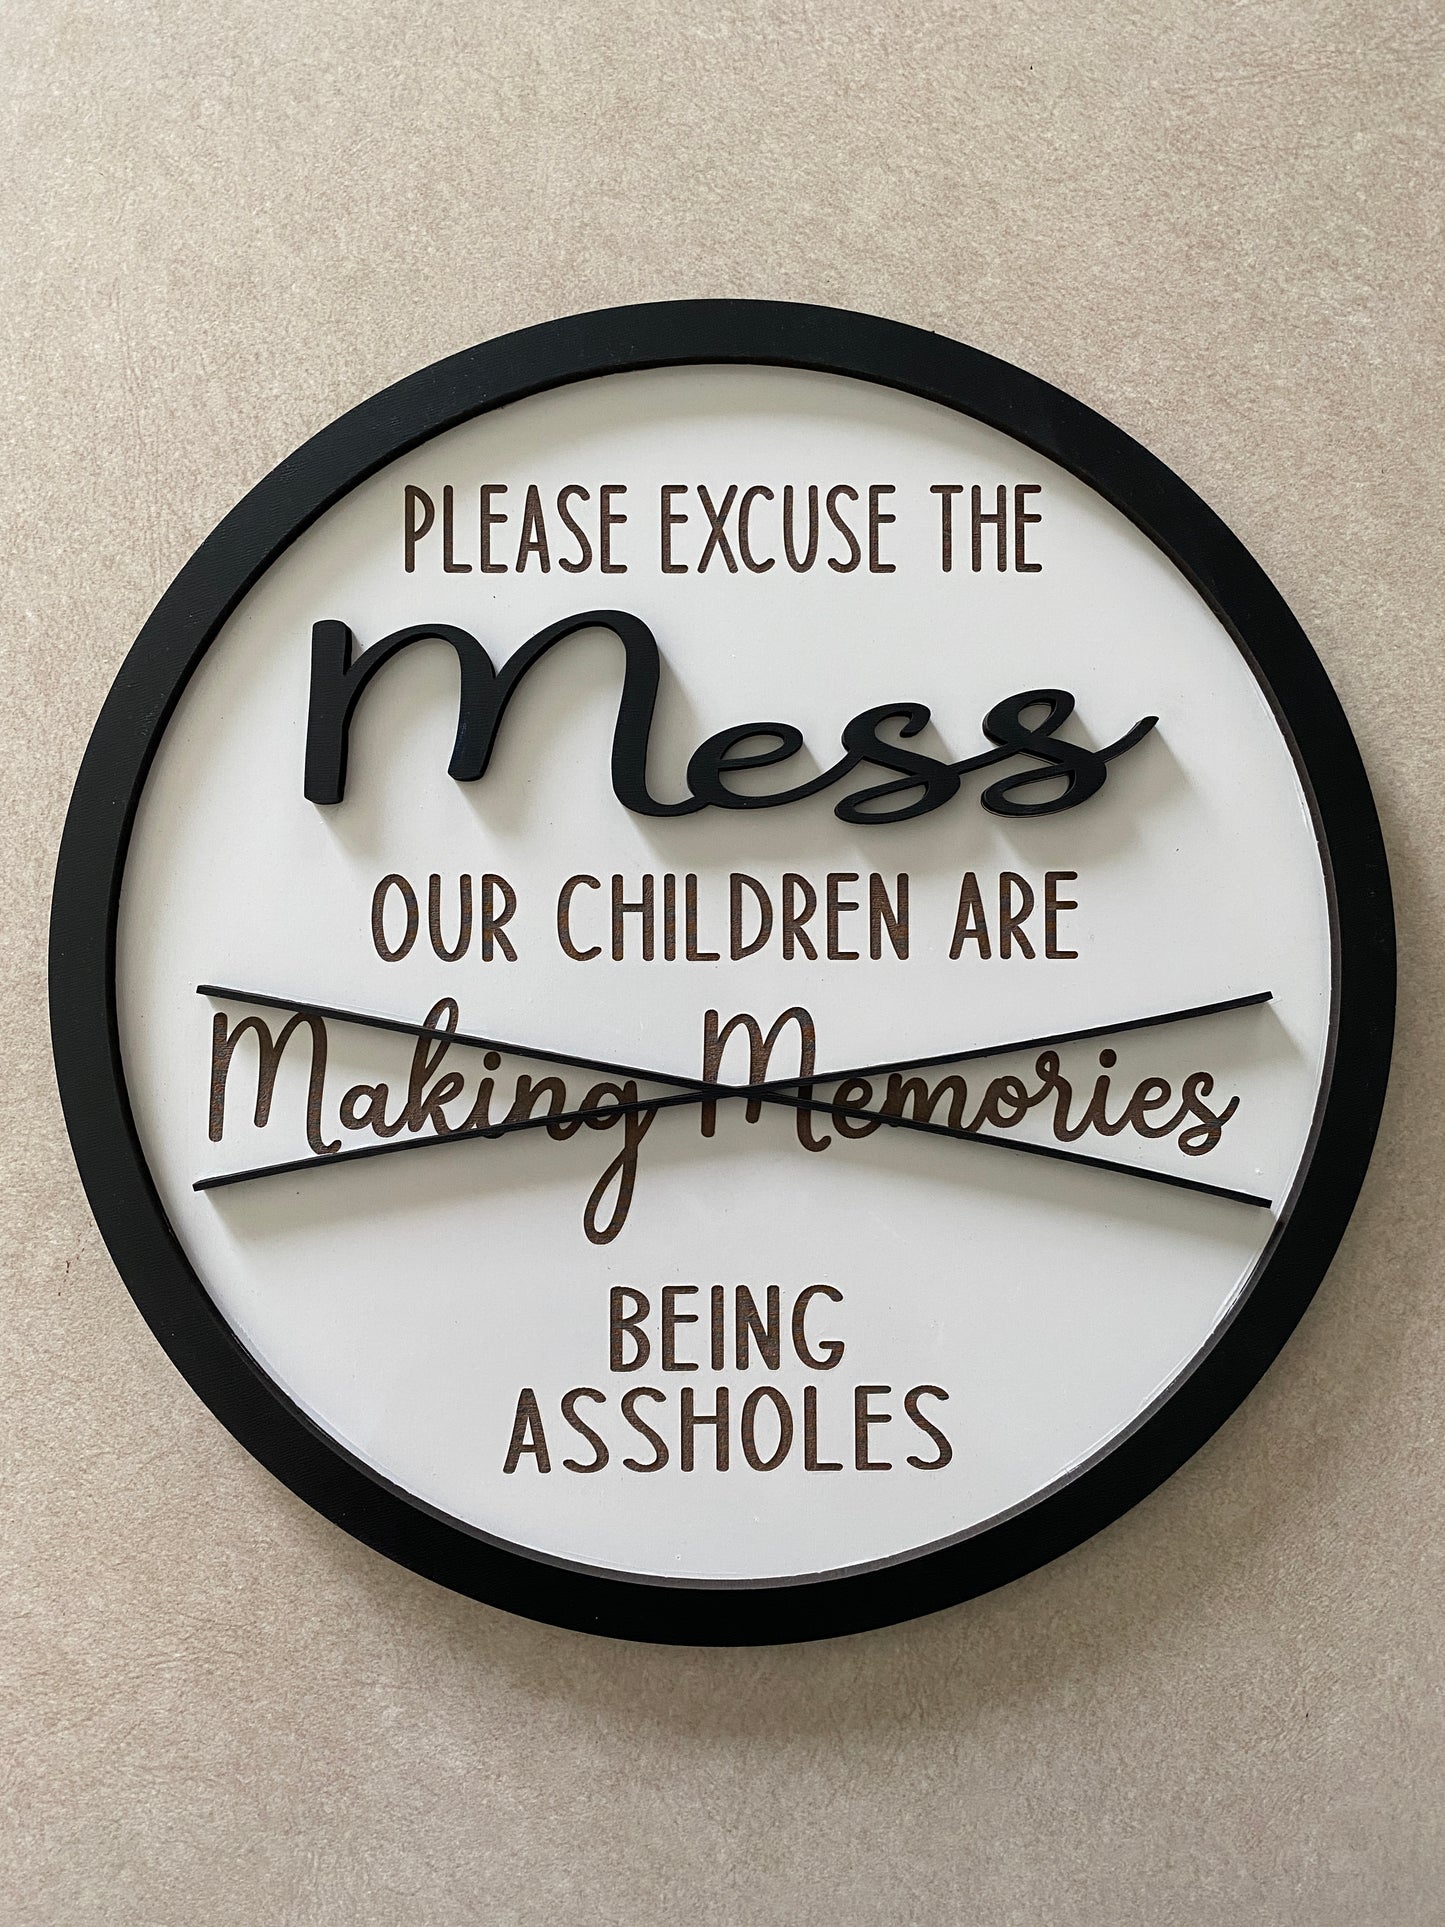 Please Excuse The Mess, Our Children Are Being Assholes sign